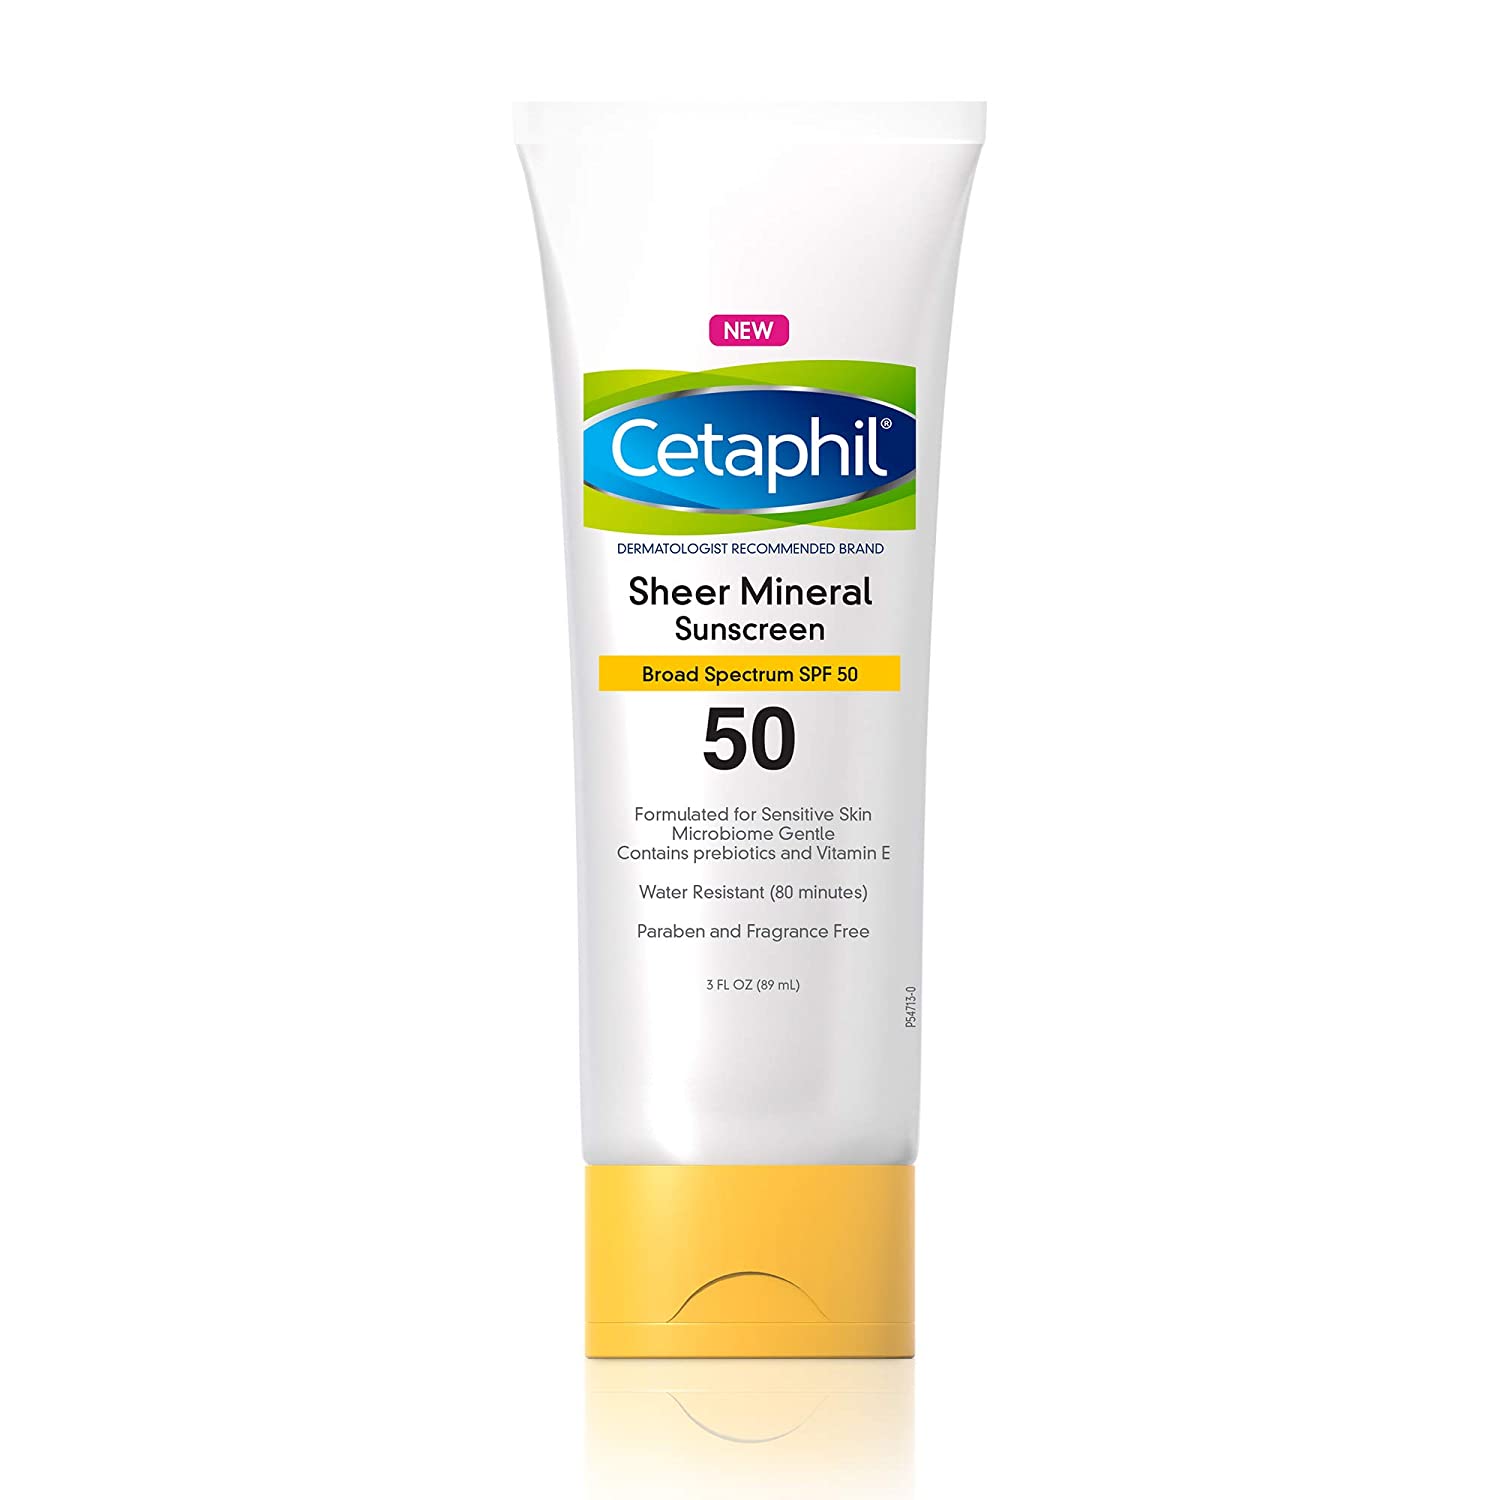 Cetaphil Sheer Mineral Sunscreen Lotion Broad Spectrum SPF 50